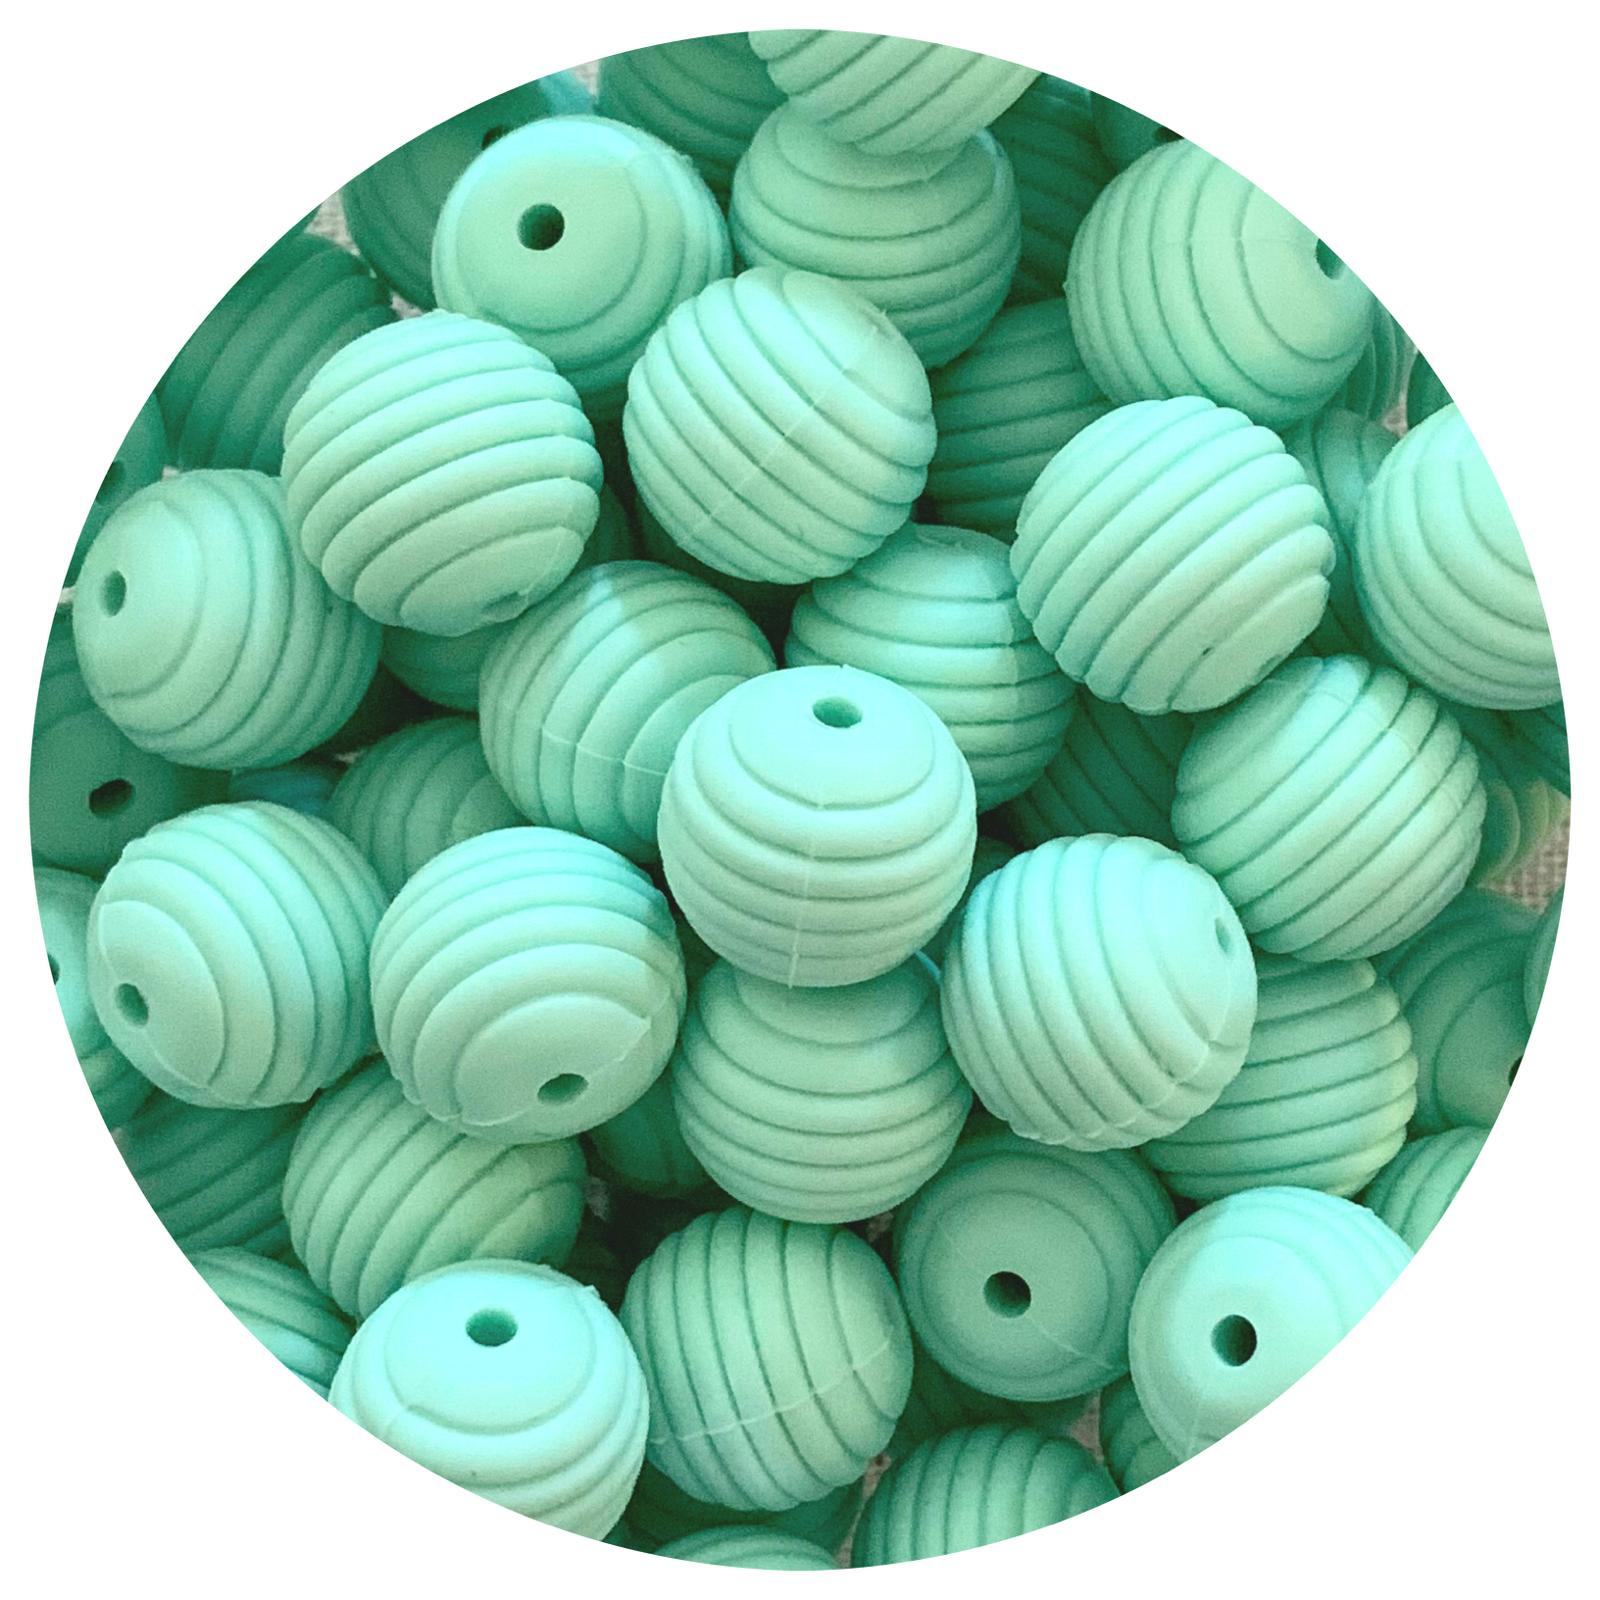 Mint Green - 15mm round Beehive - 5 Beads